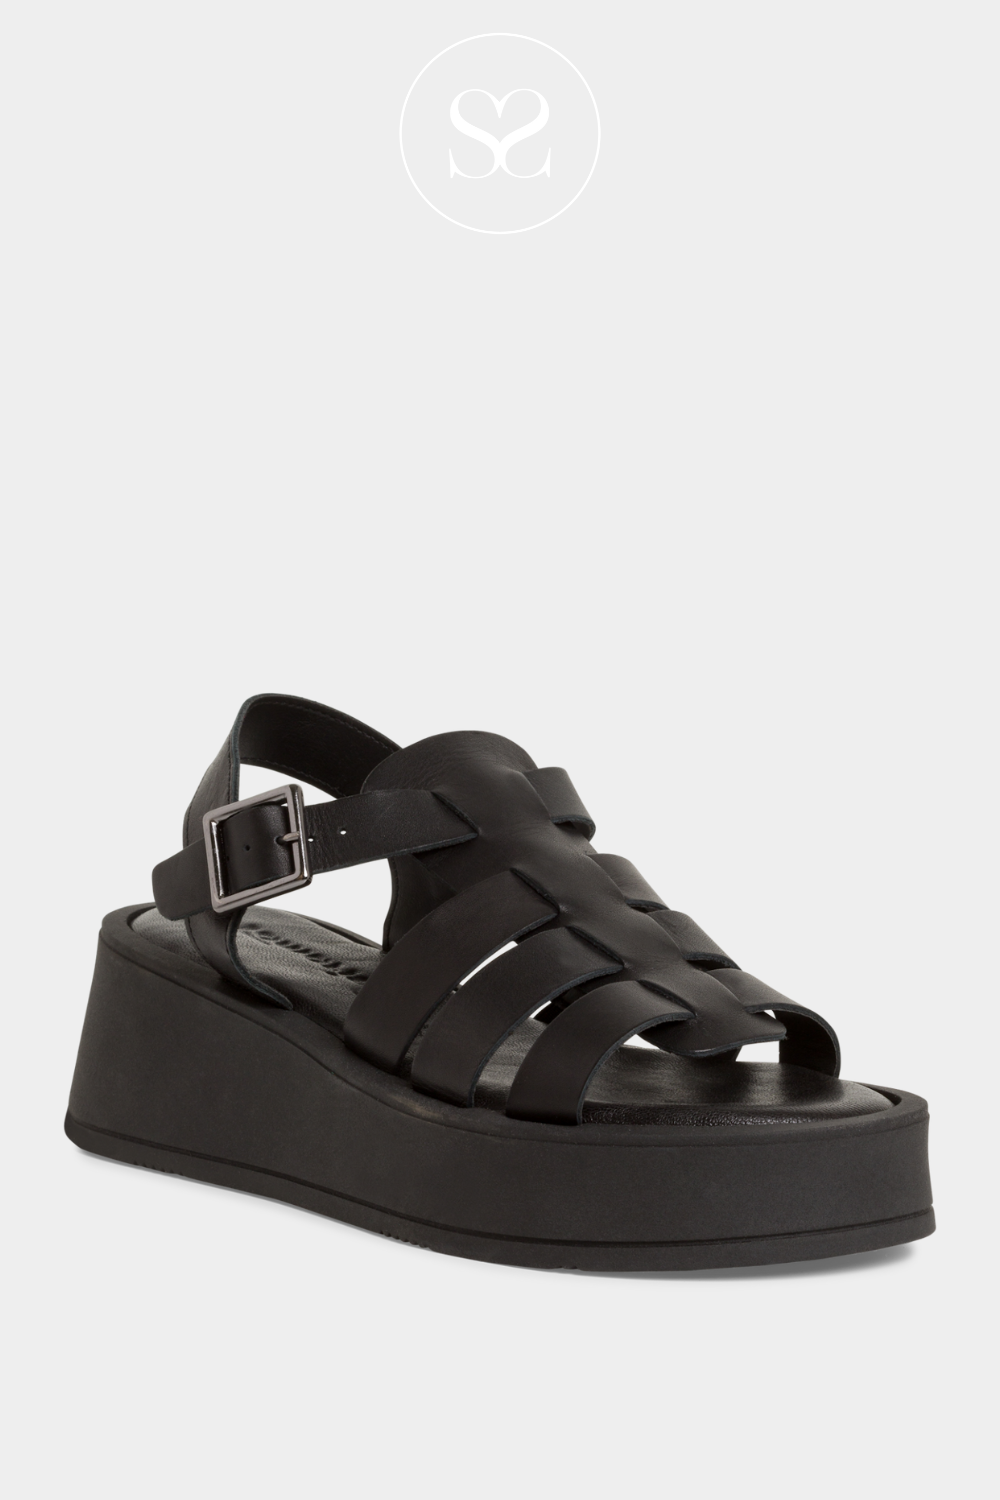 TAMARIS 1-28018-42 BLACK LEATHER FLATFORM GLADIATOR STYLE CHUNKY SANDALS WITH THICK STRAPS AND ADJUSTABLE STRAP.